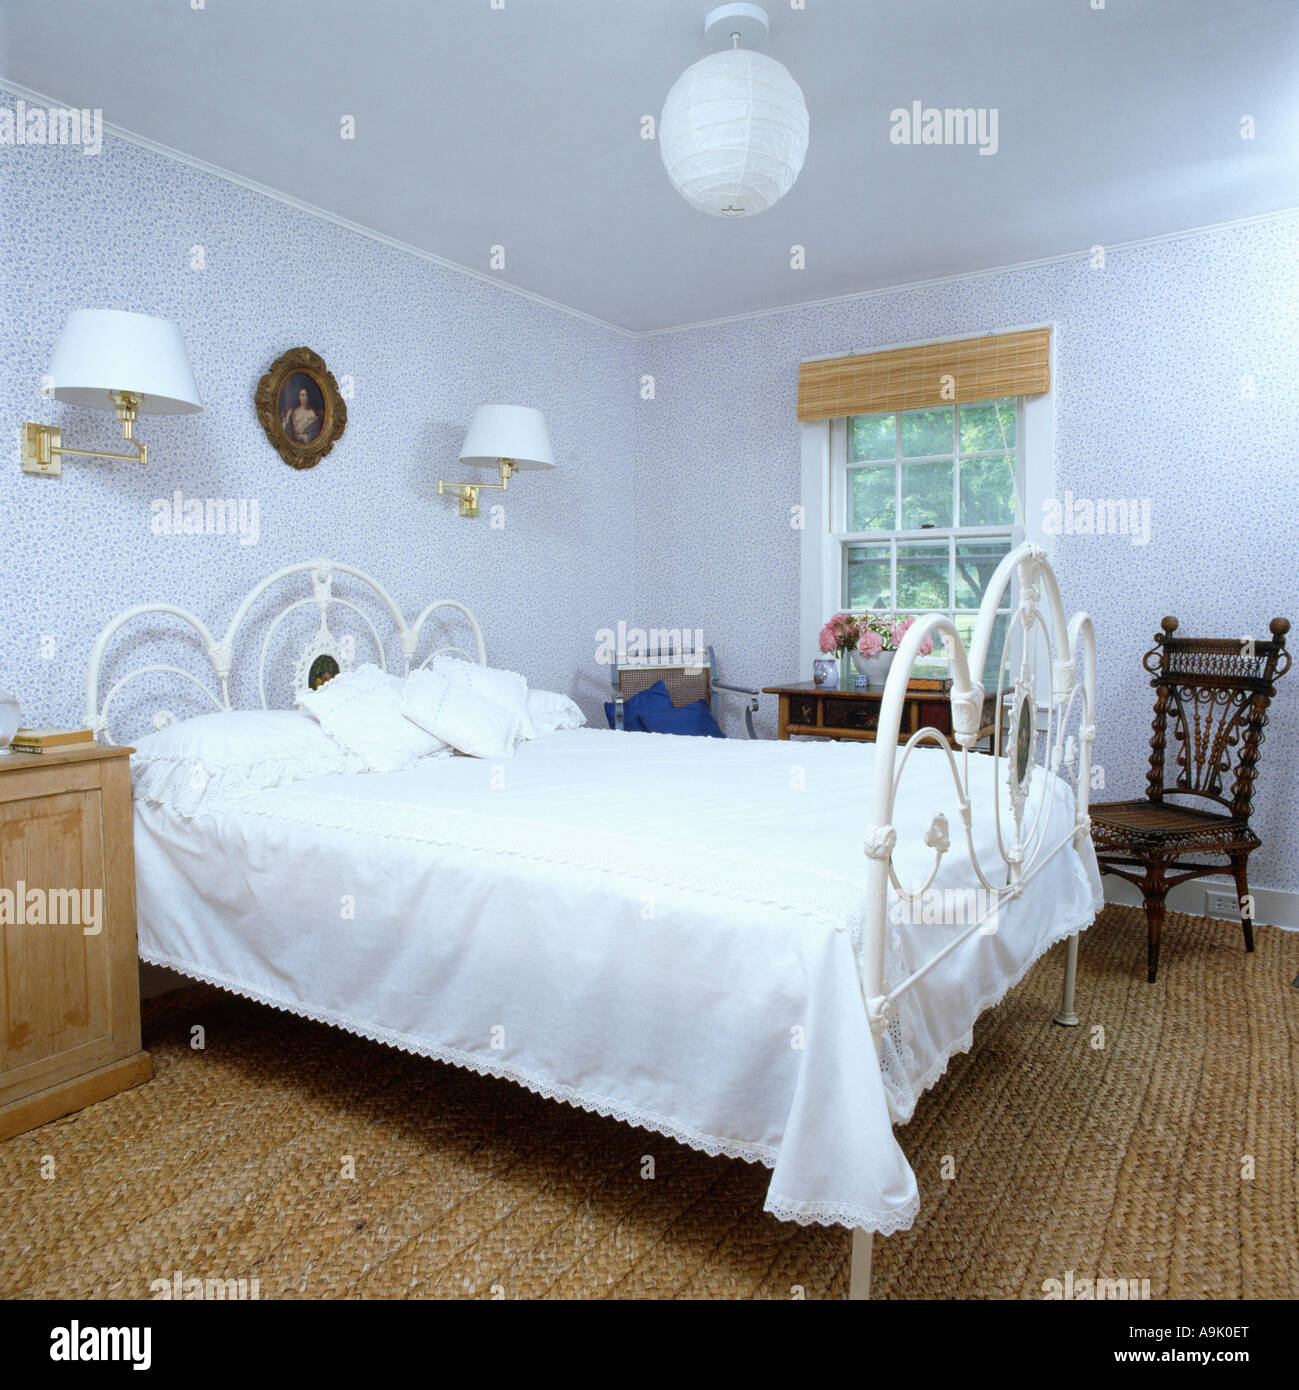 White Wrought Iron Bed In White Country Bedroom With